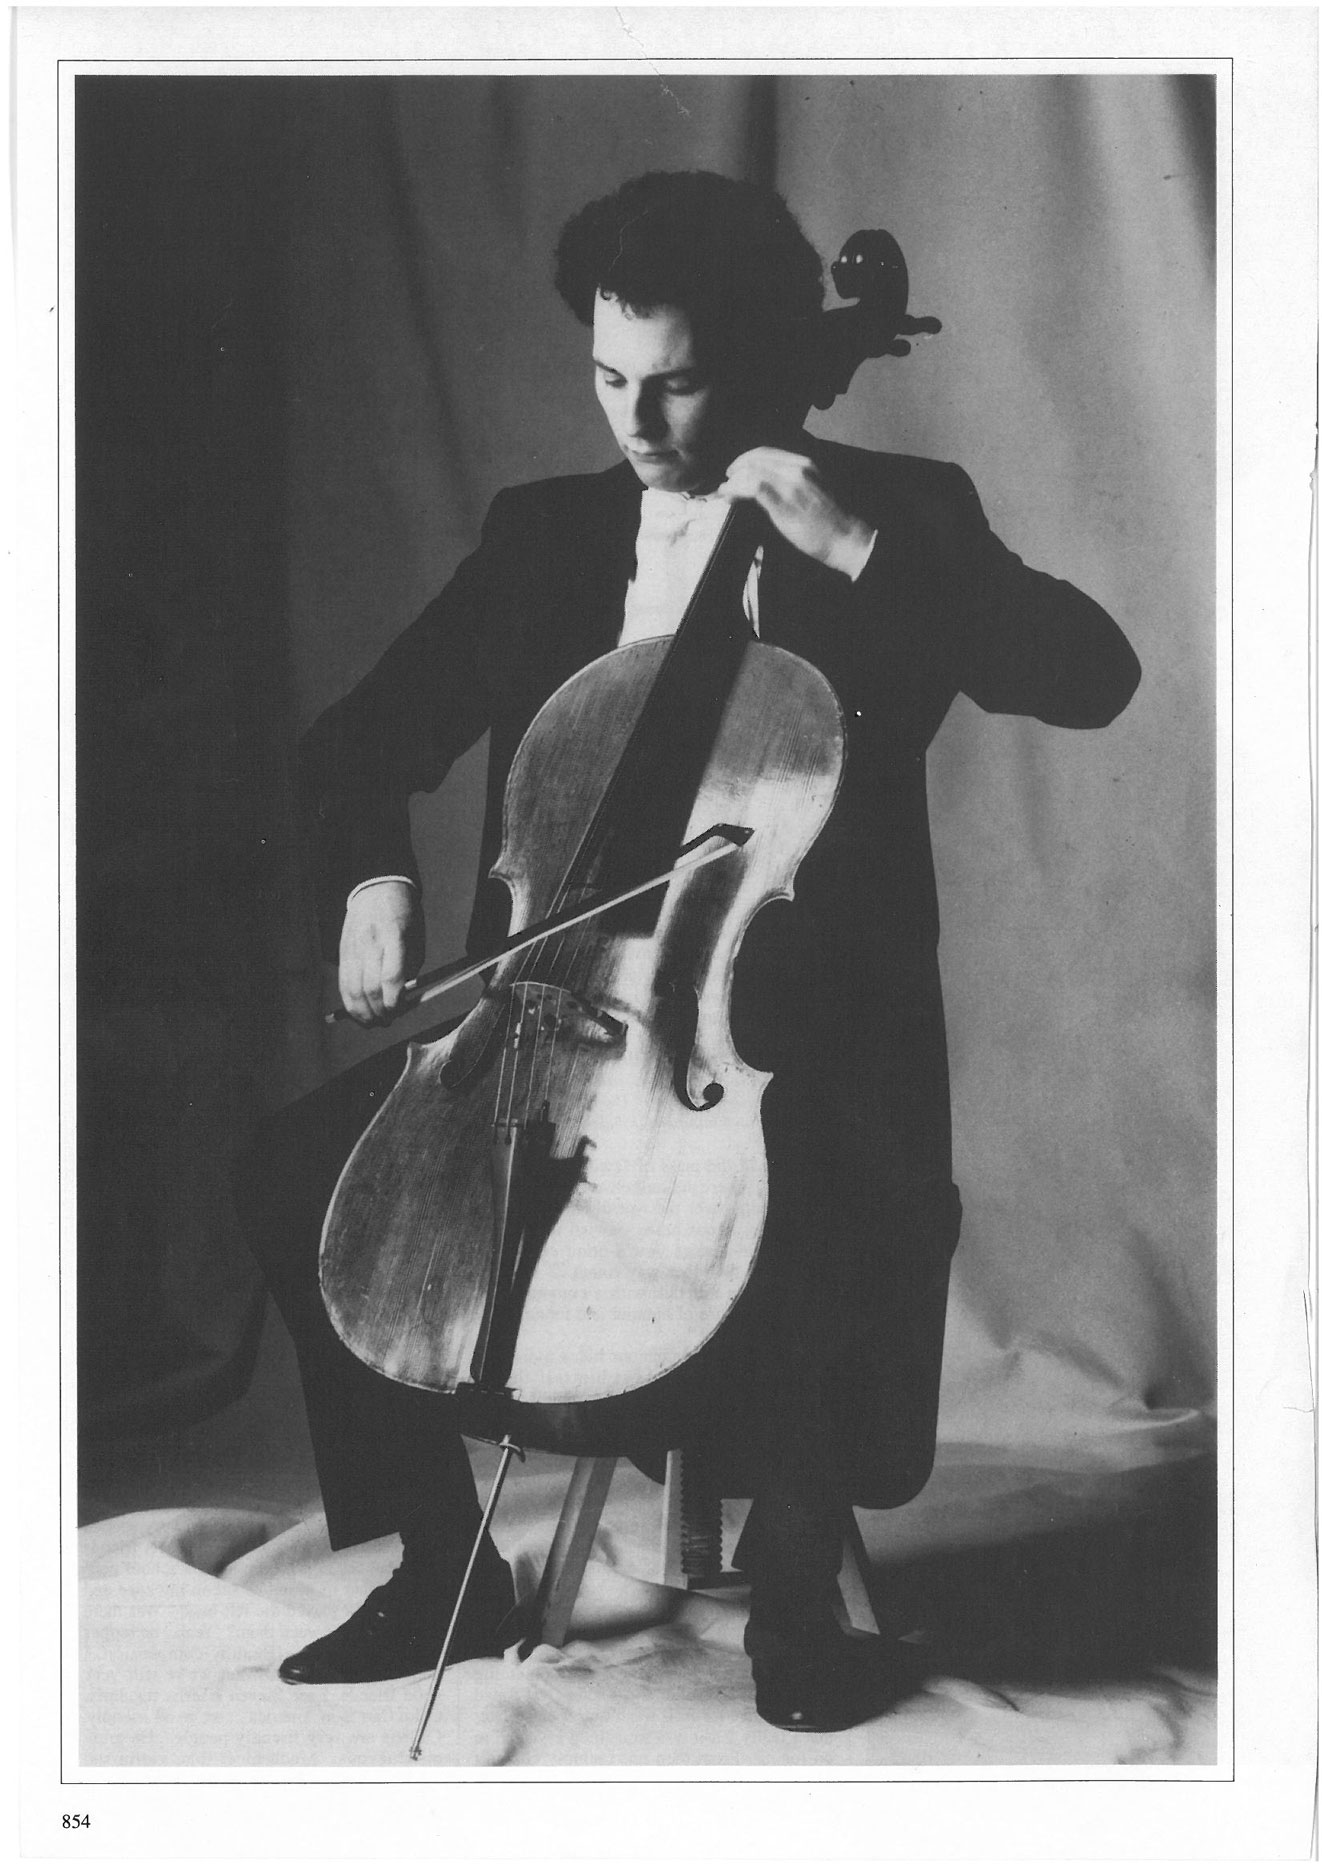 Feature, 1989, The Strad, p2